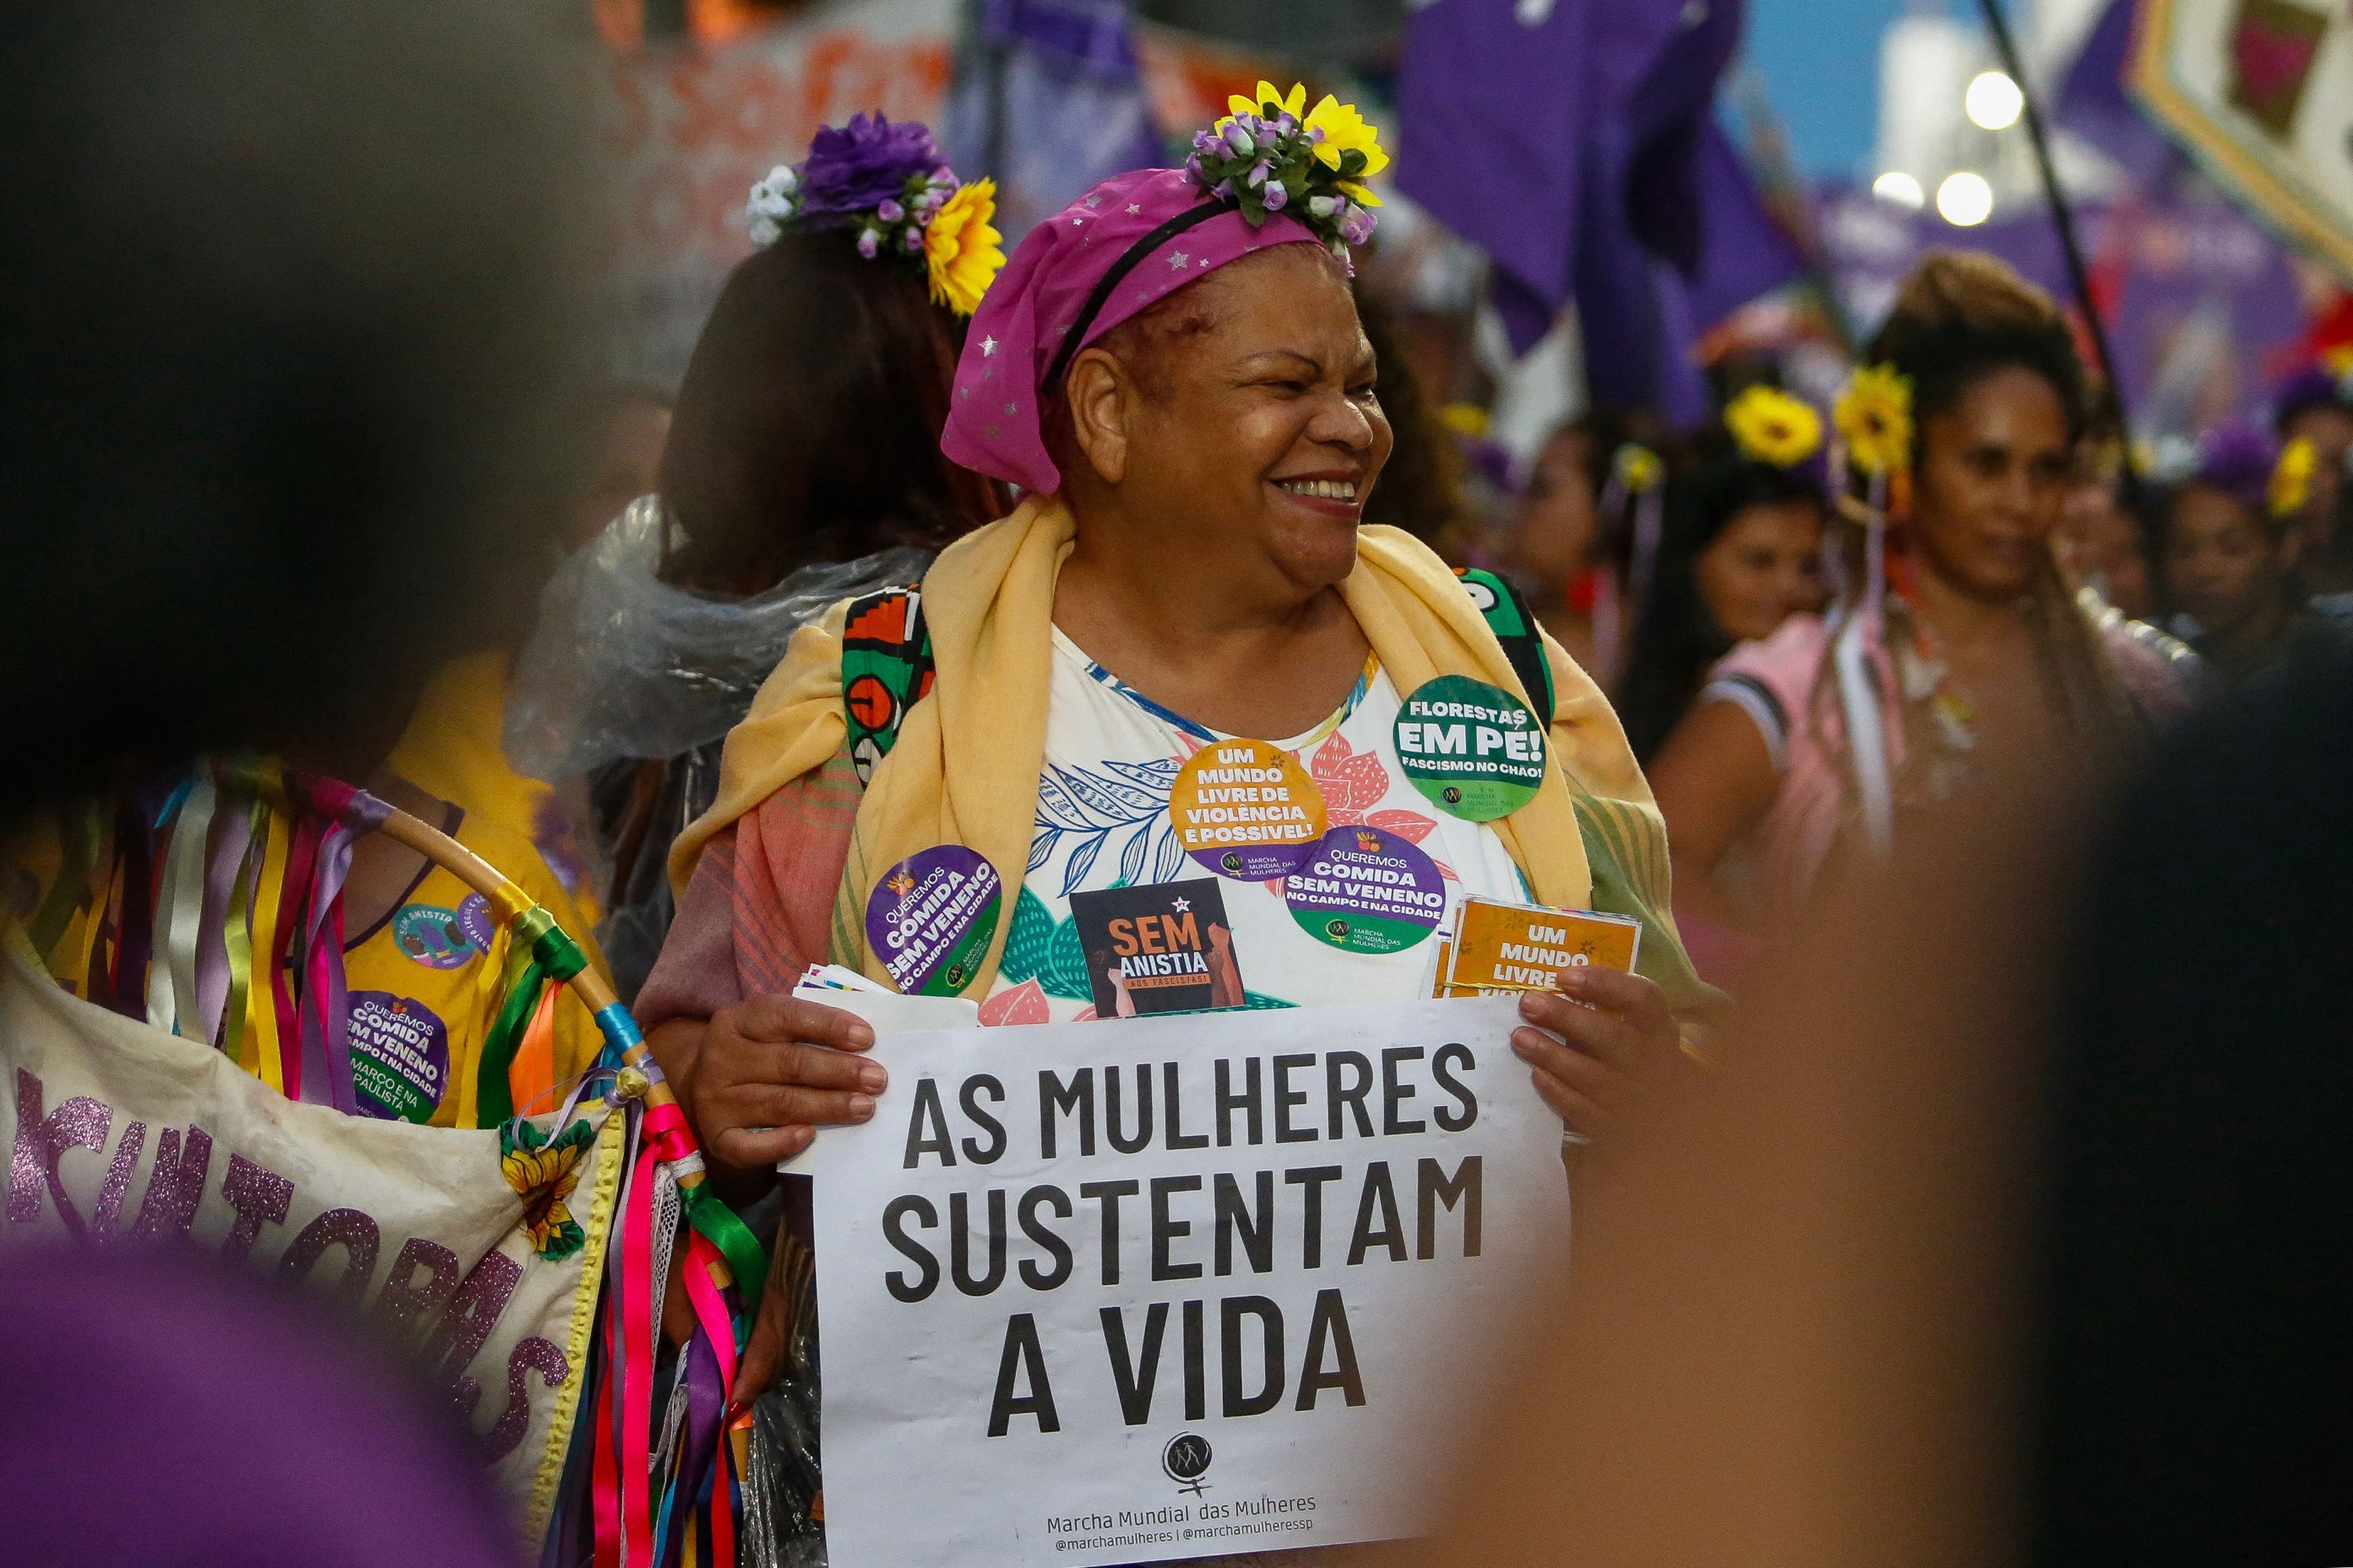 a woman smiles and looks to the side while holding a sign in Portuguese that says "women sustain life"